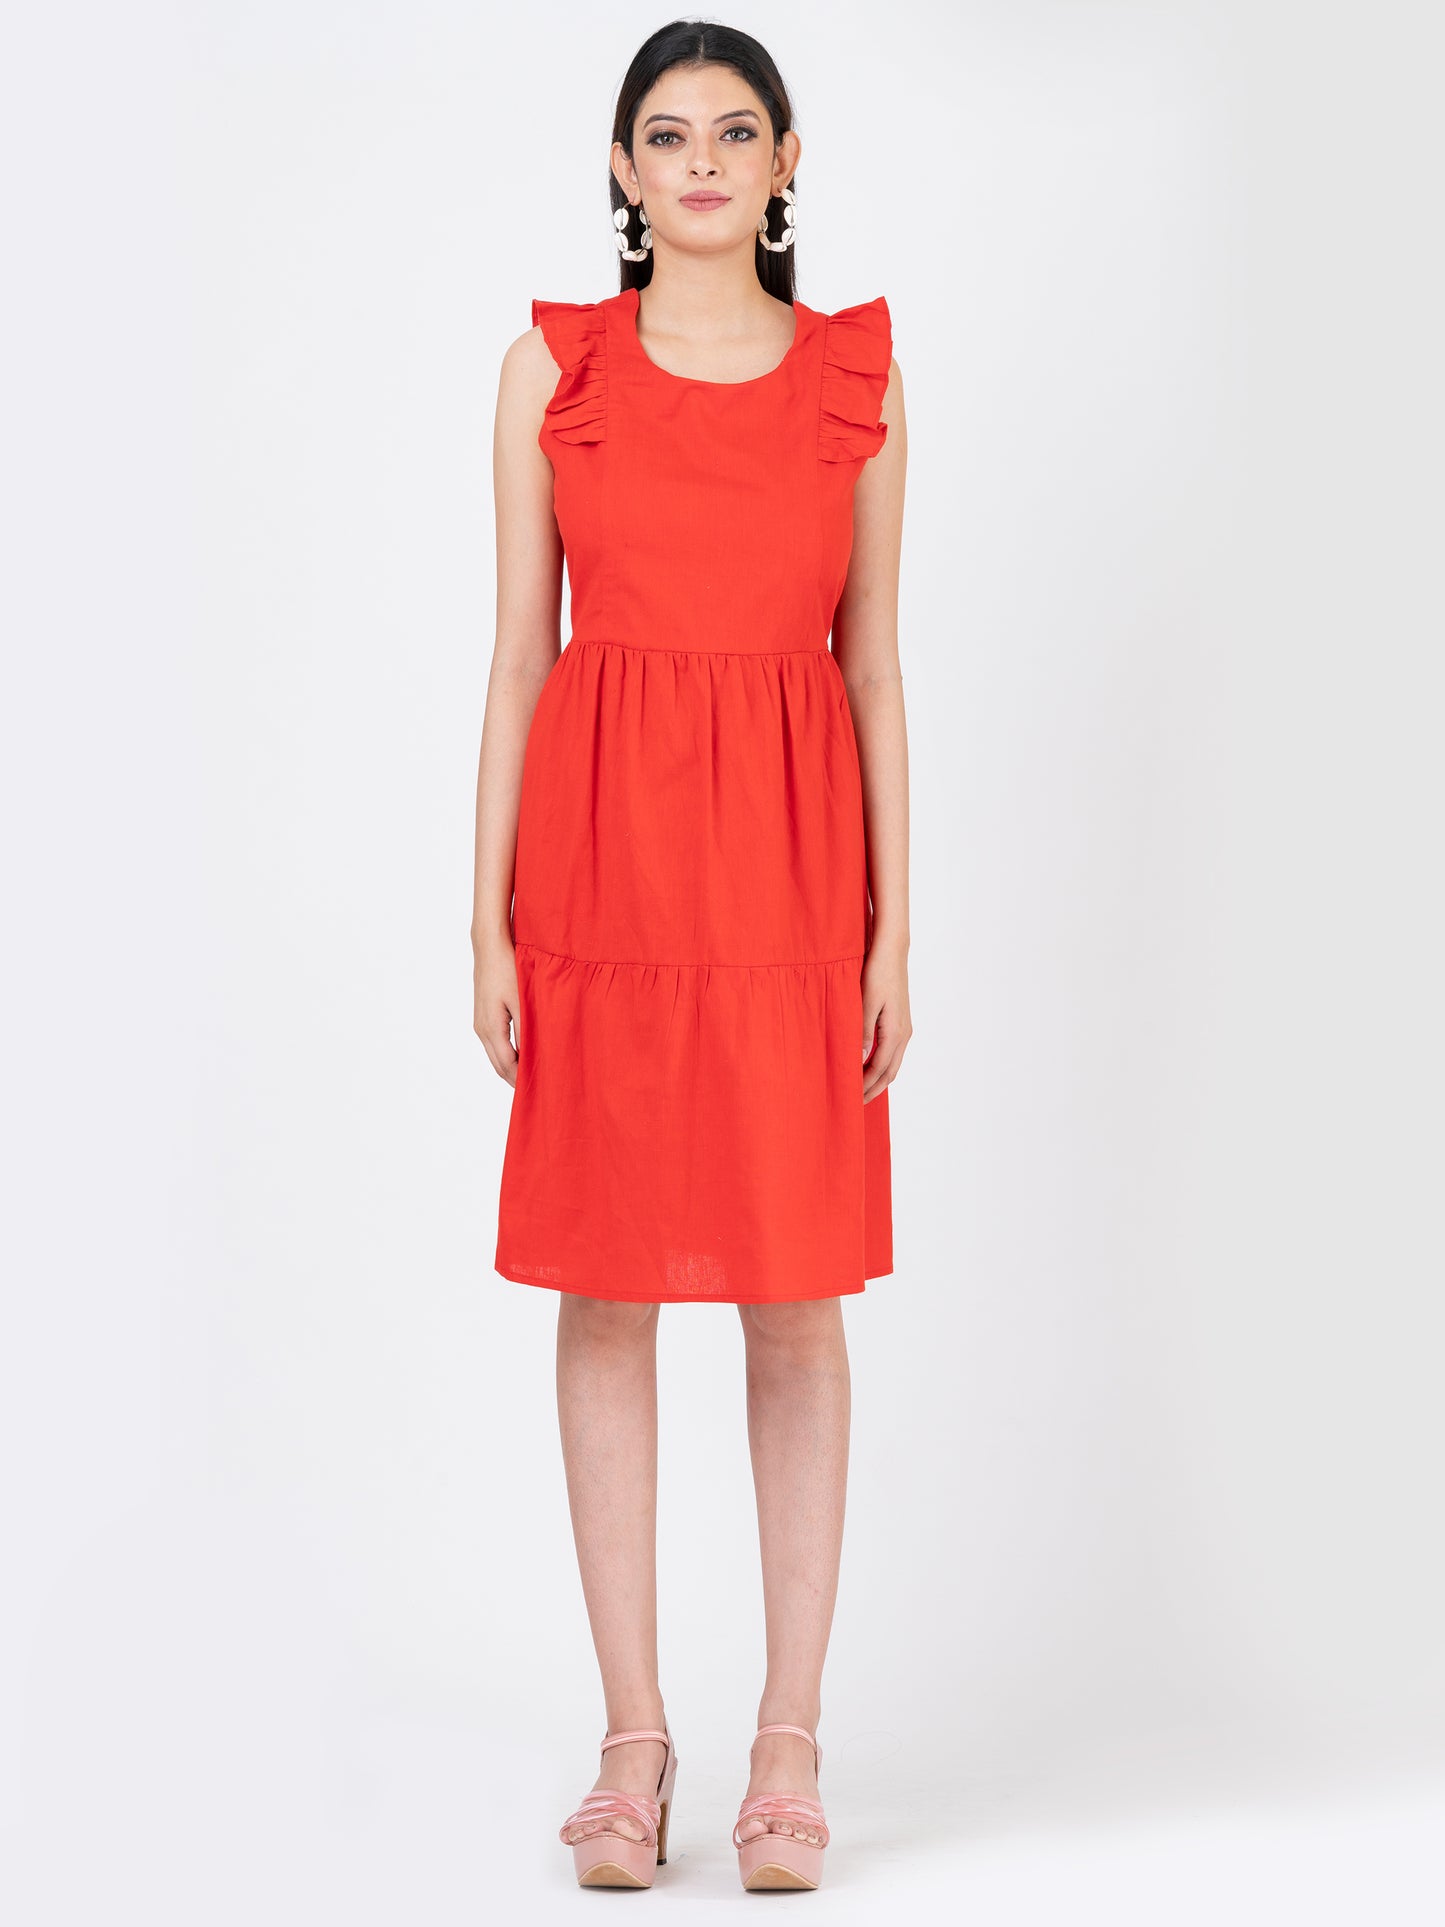 Women's Linen Cotton Red Brunch Outfits With Ruffle Sleeves-Brunch Dress